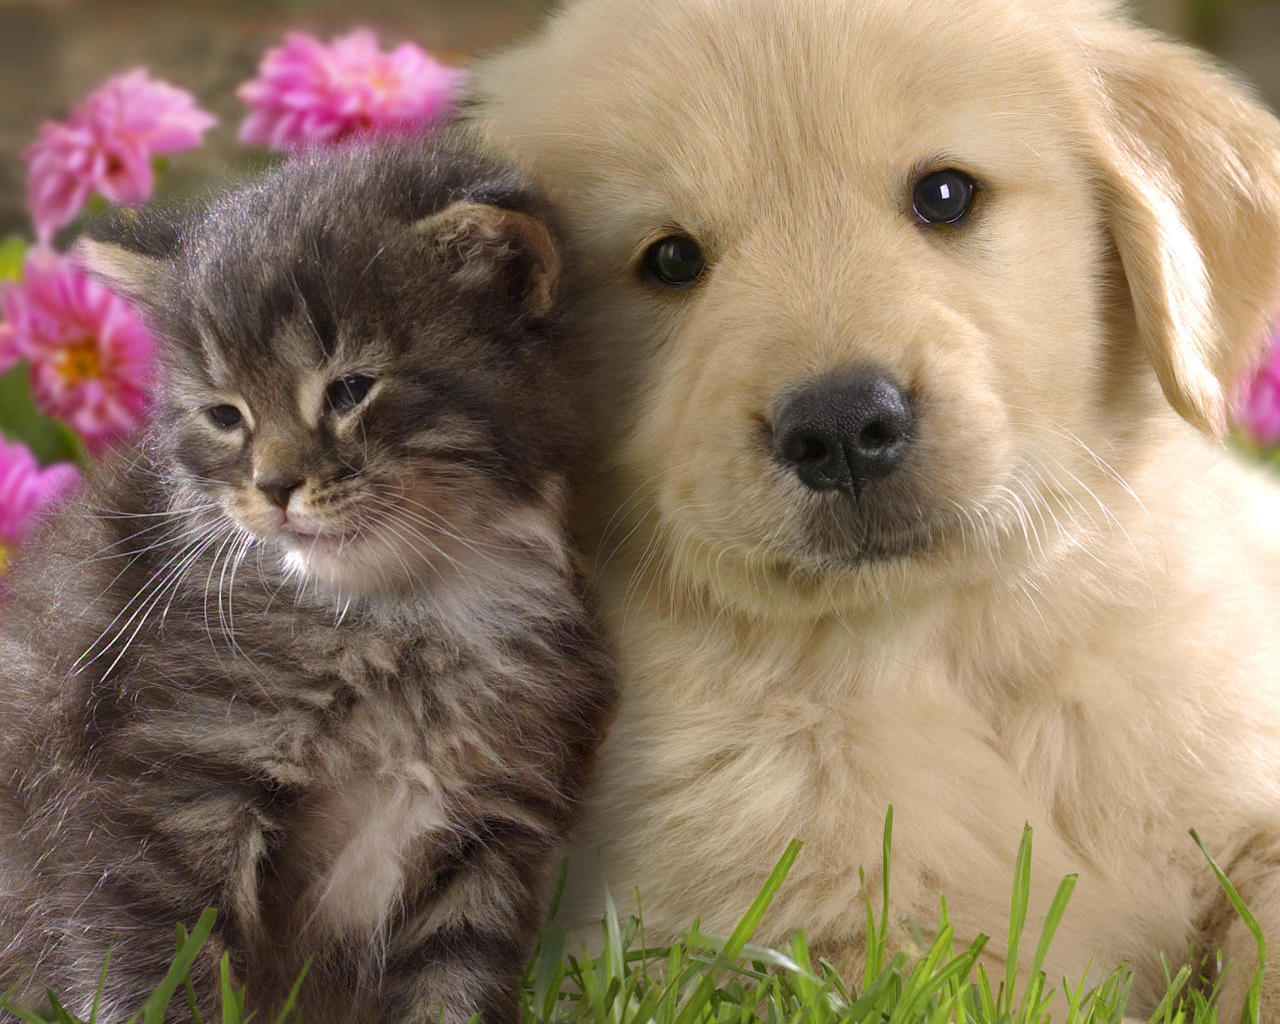 Kittens and puppies wallpaper